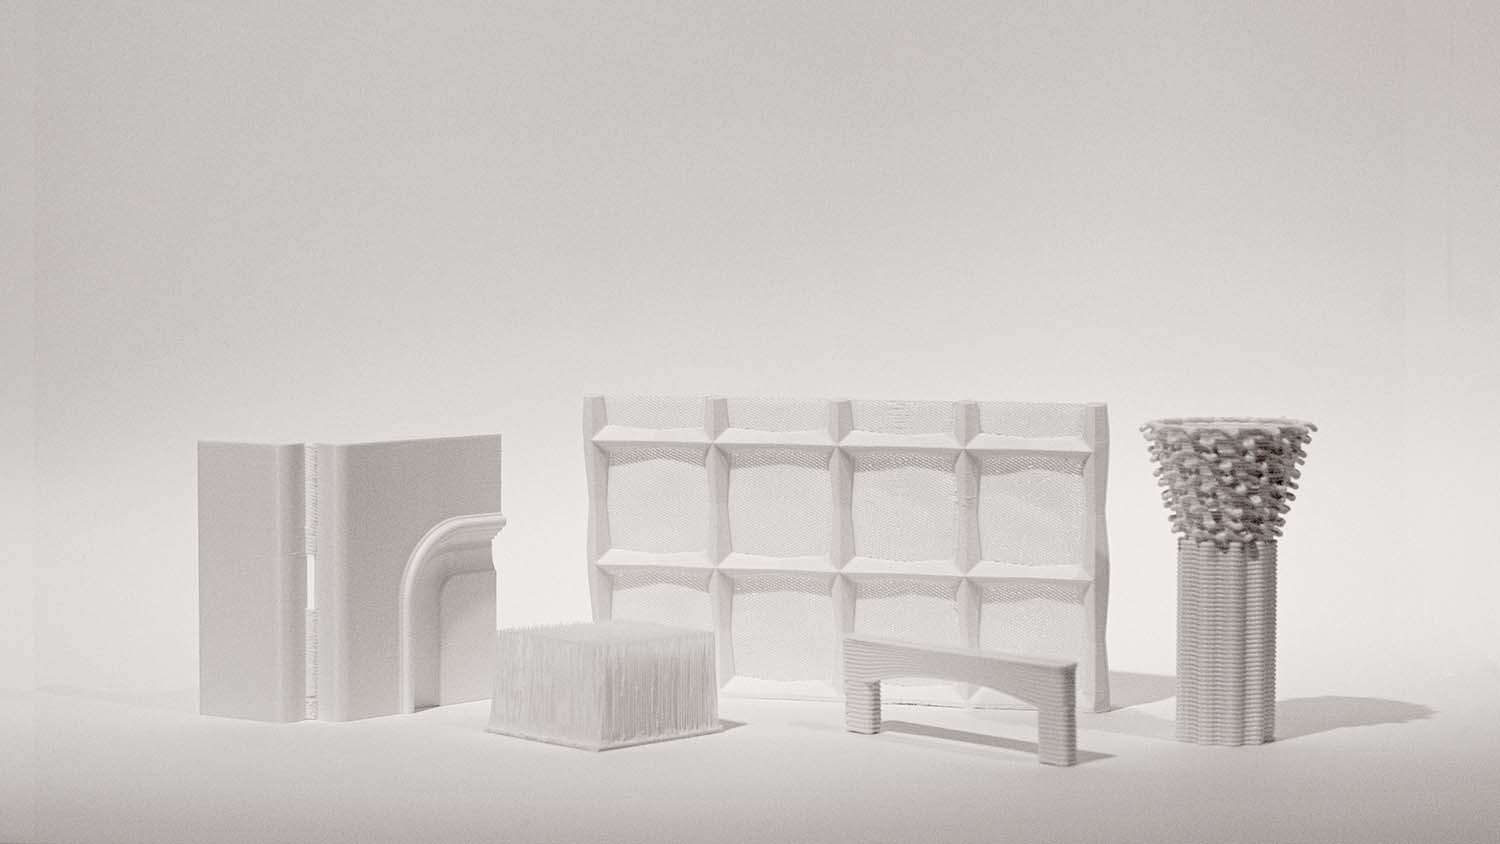 White 3D models of architectural elements